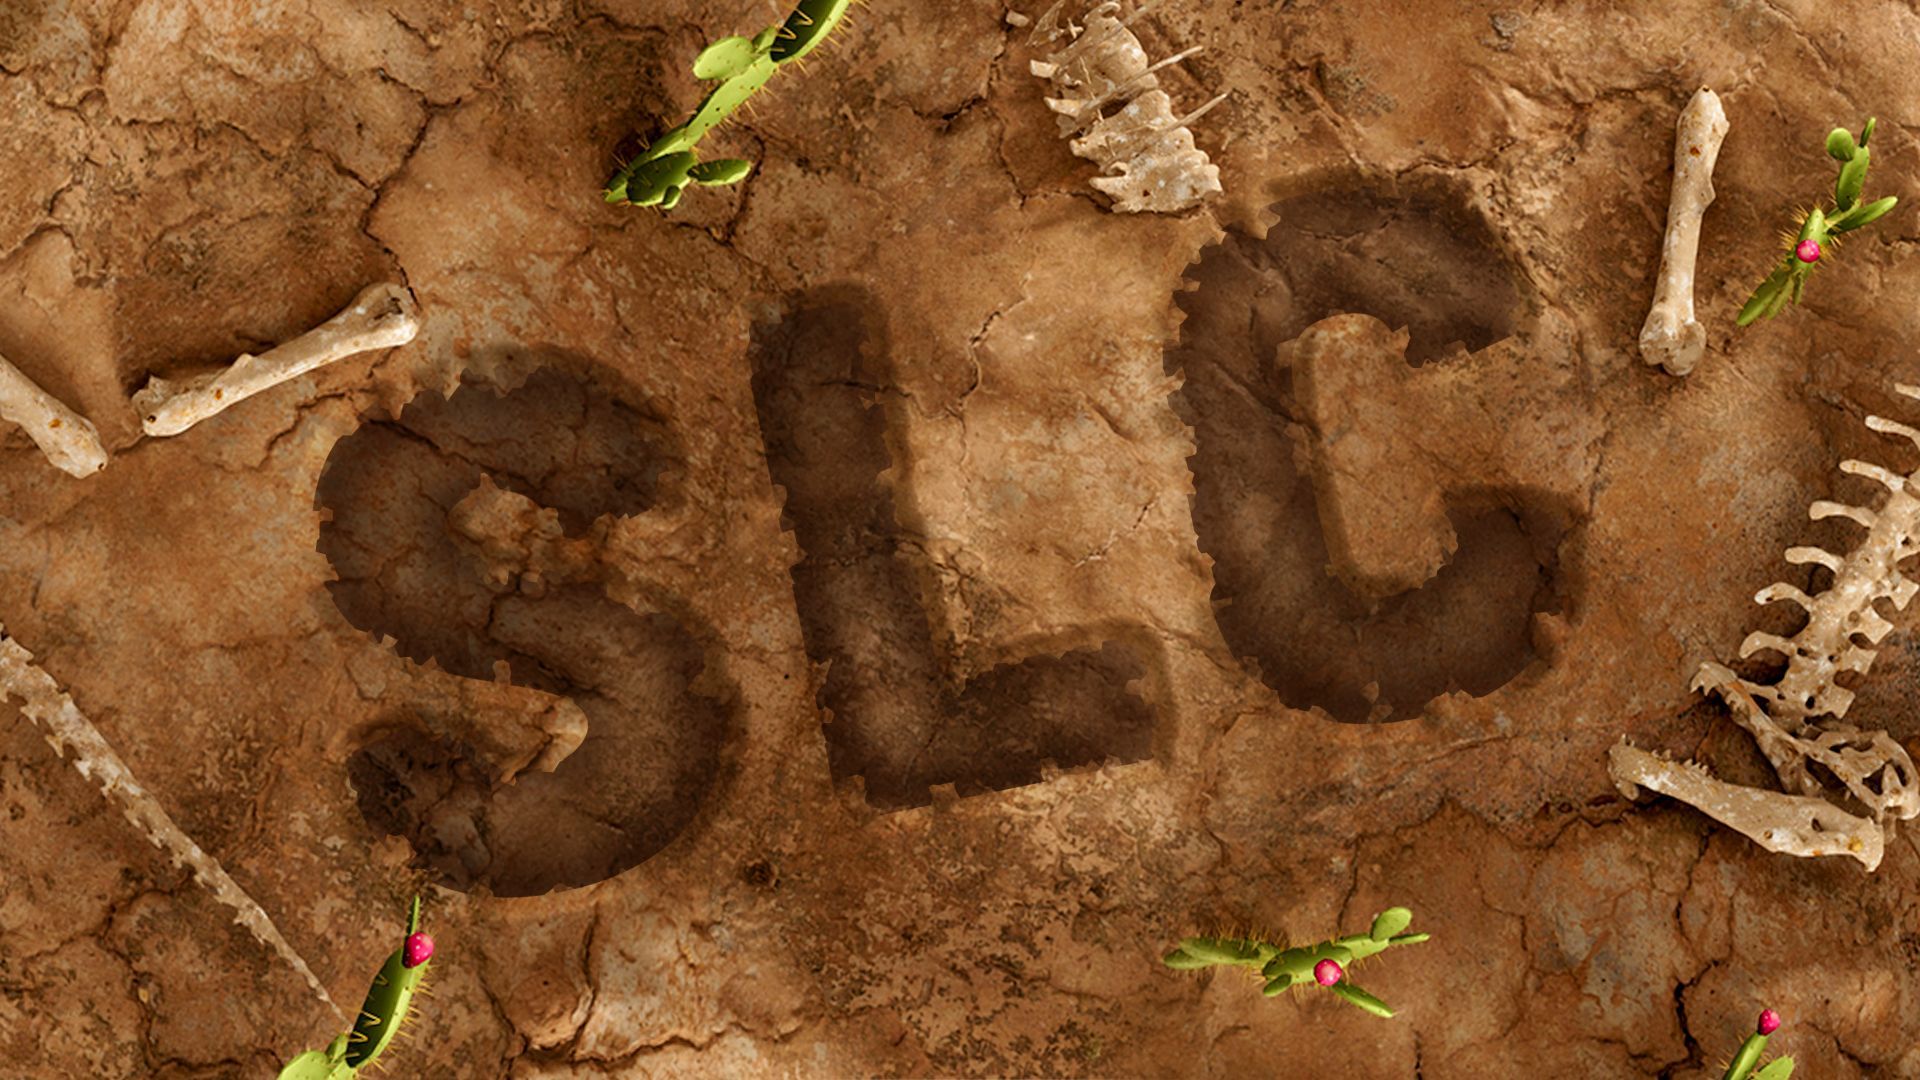 Illustration of "SLC" carved into an excavation site, surrounded by catcus and dinosaur bones. 